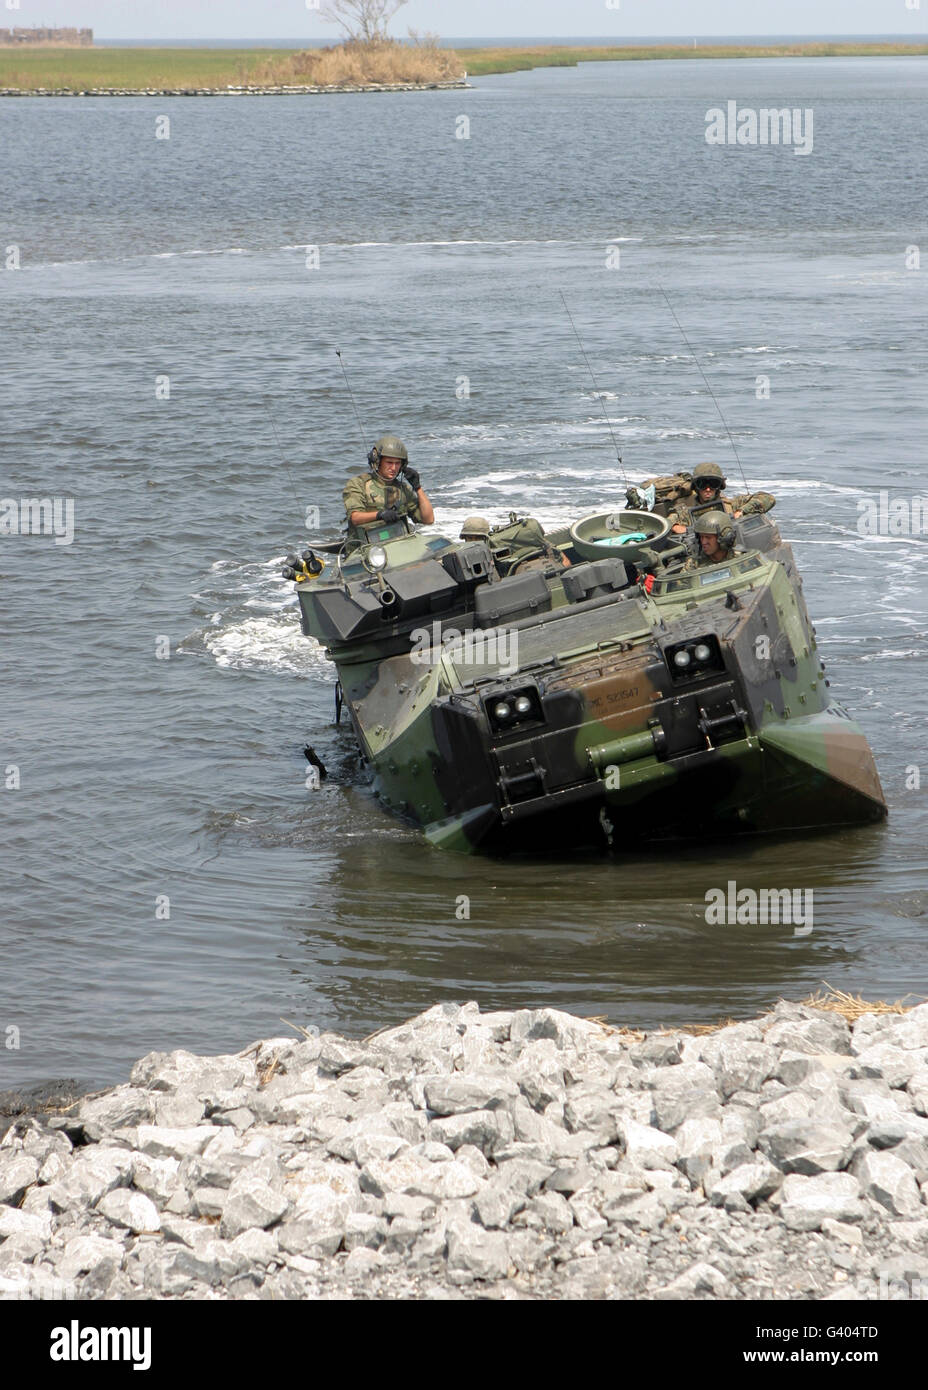 An amphibious assault vehicle climbs out of the water. Stock Photo